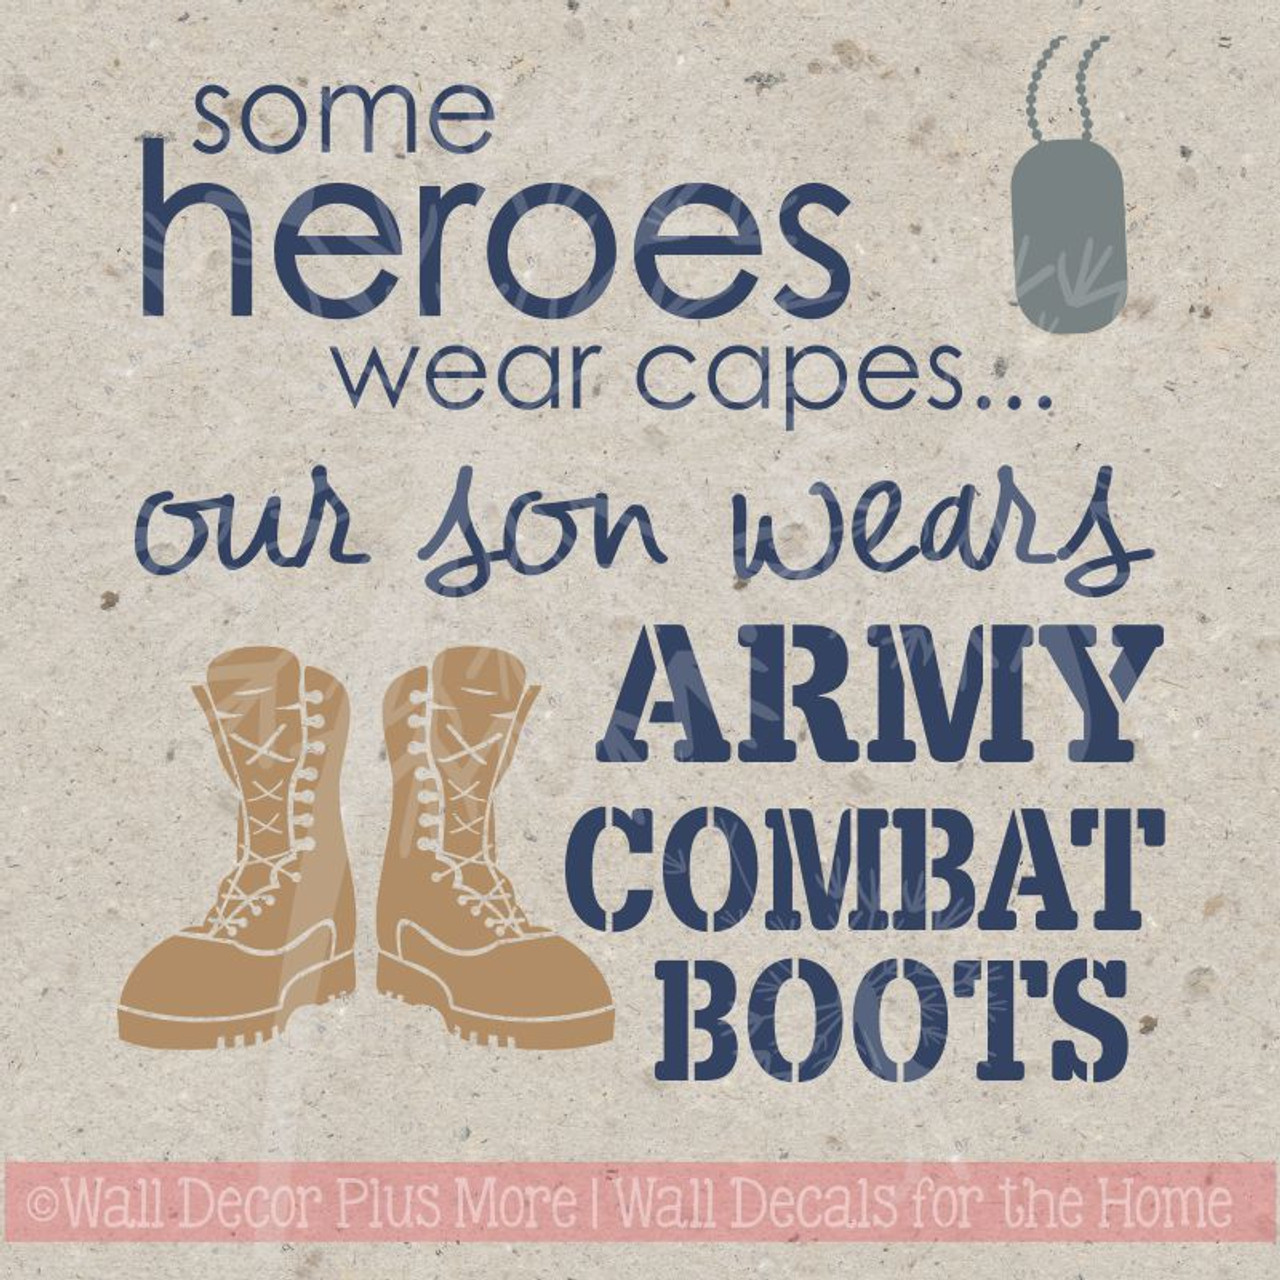 Our Son Wears Combat Boots Vinyl Wall Decals Sticker Quotes